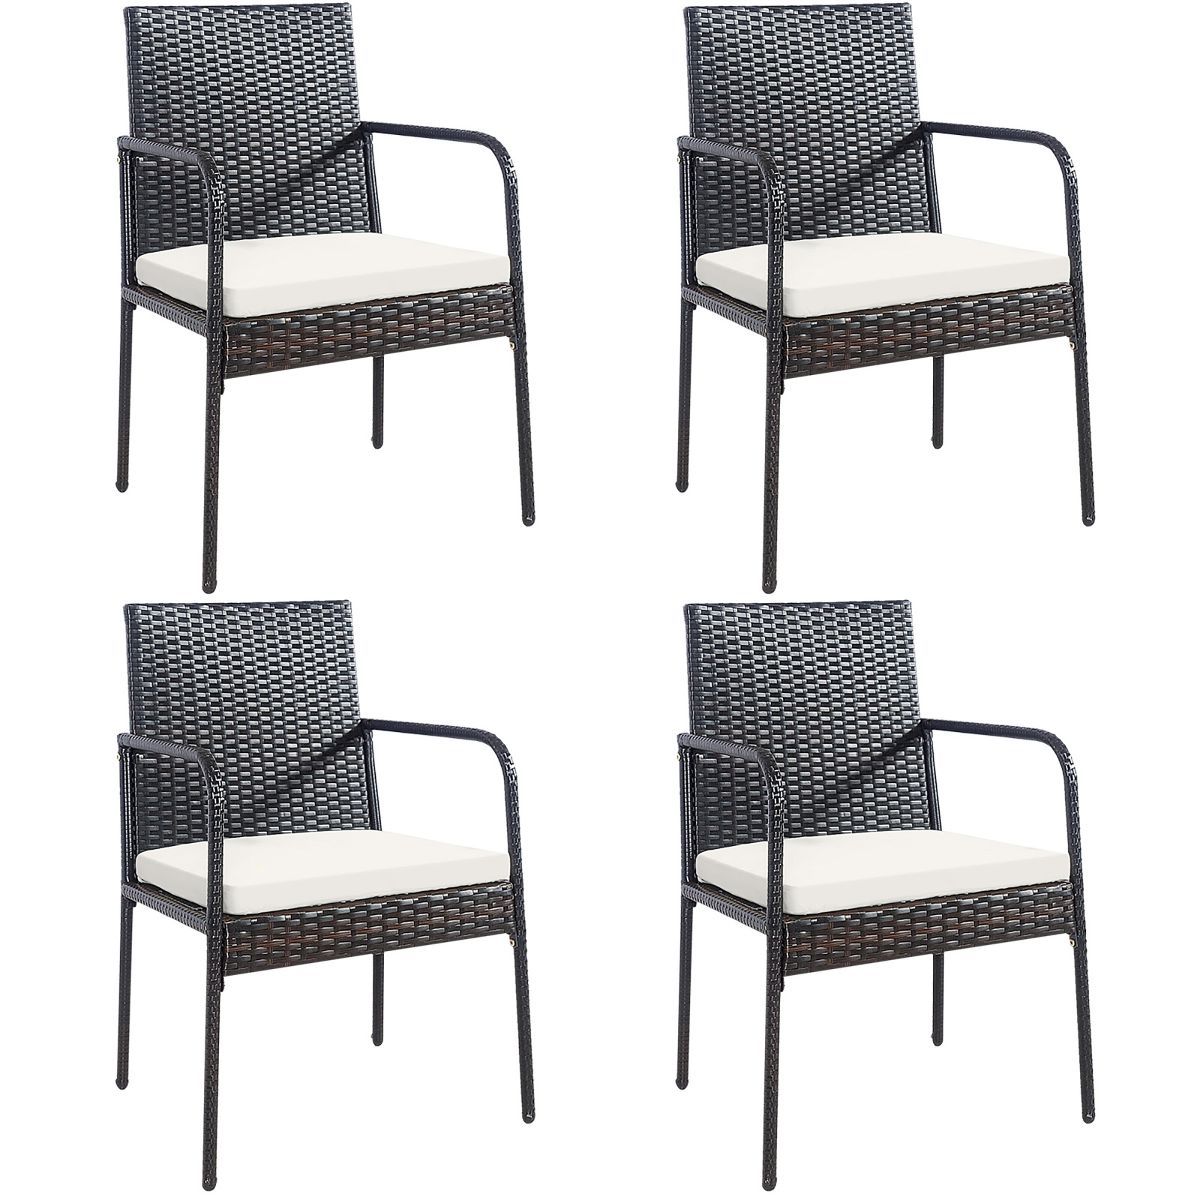 Costway 4PCS Patio Wicker Rattan Dining Chairs Cushioned Seats Armrest Garden | Target